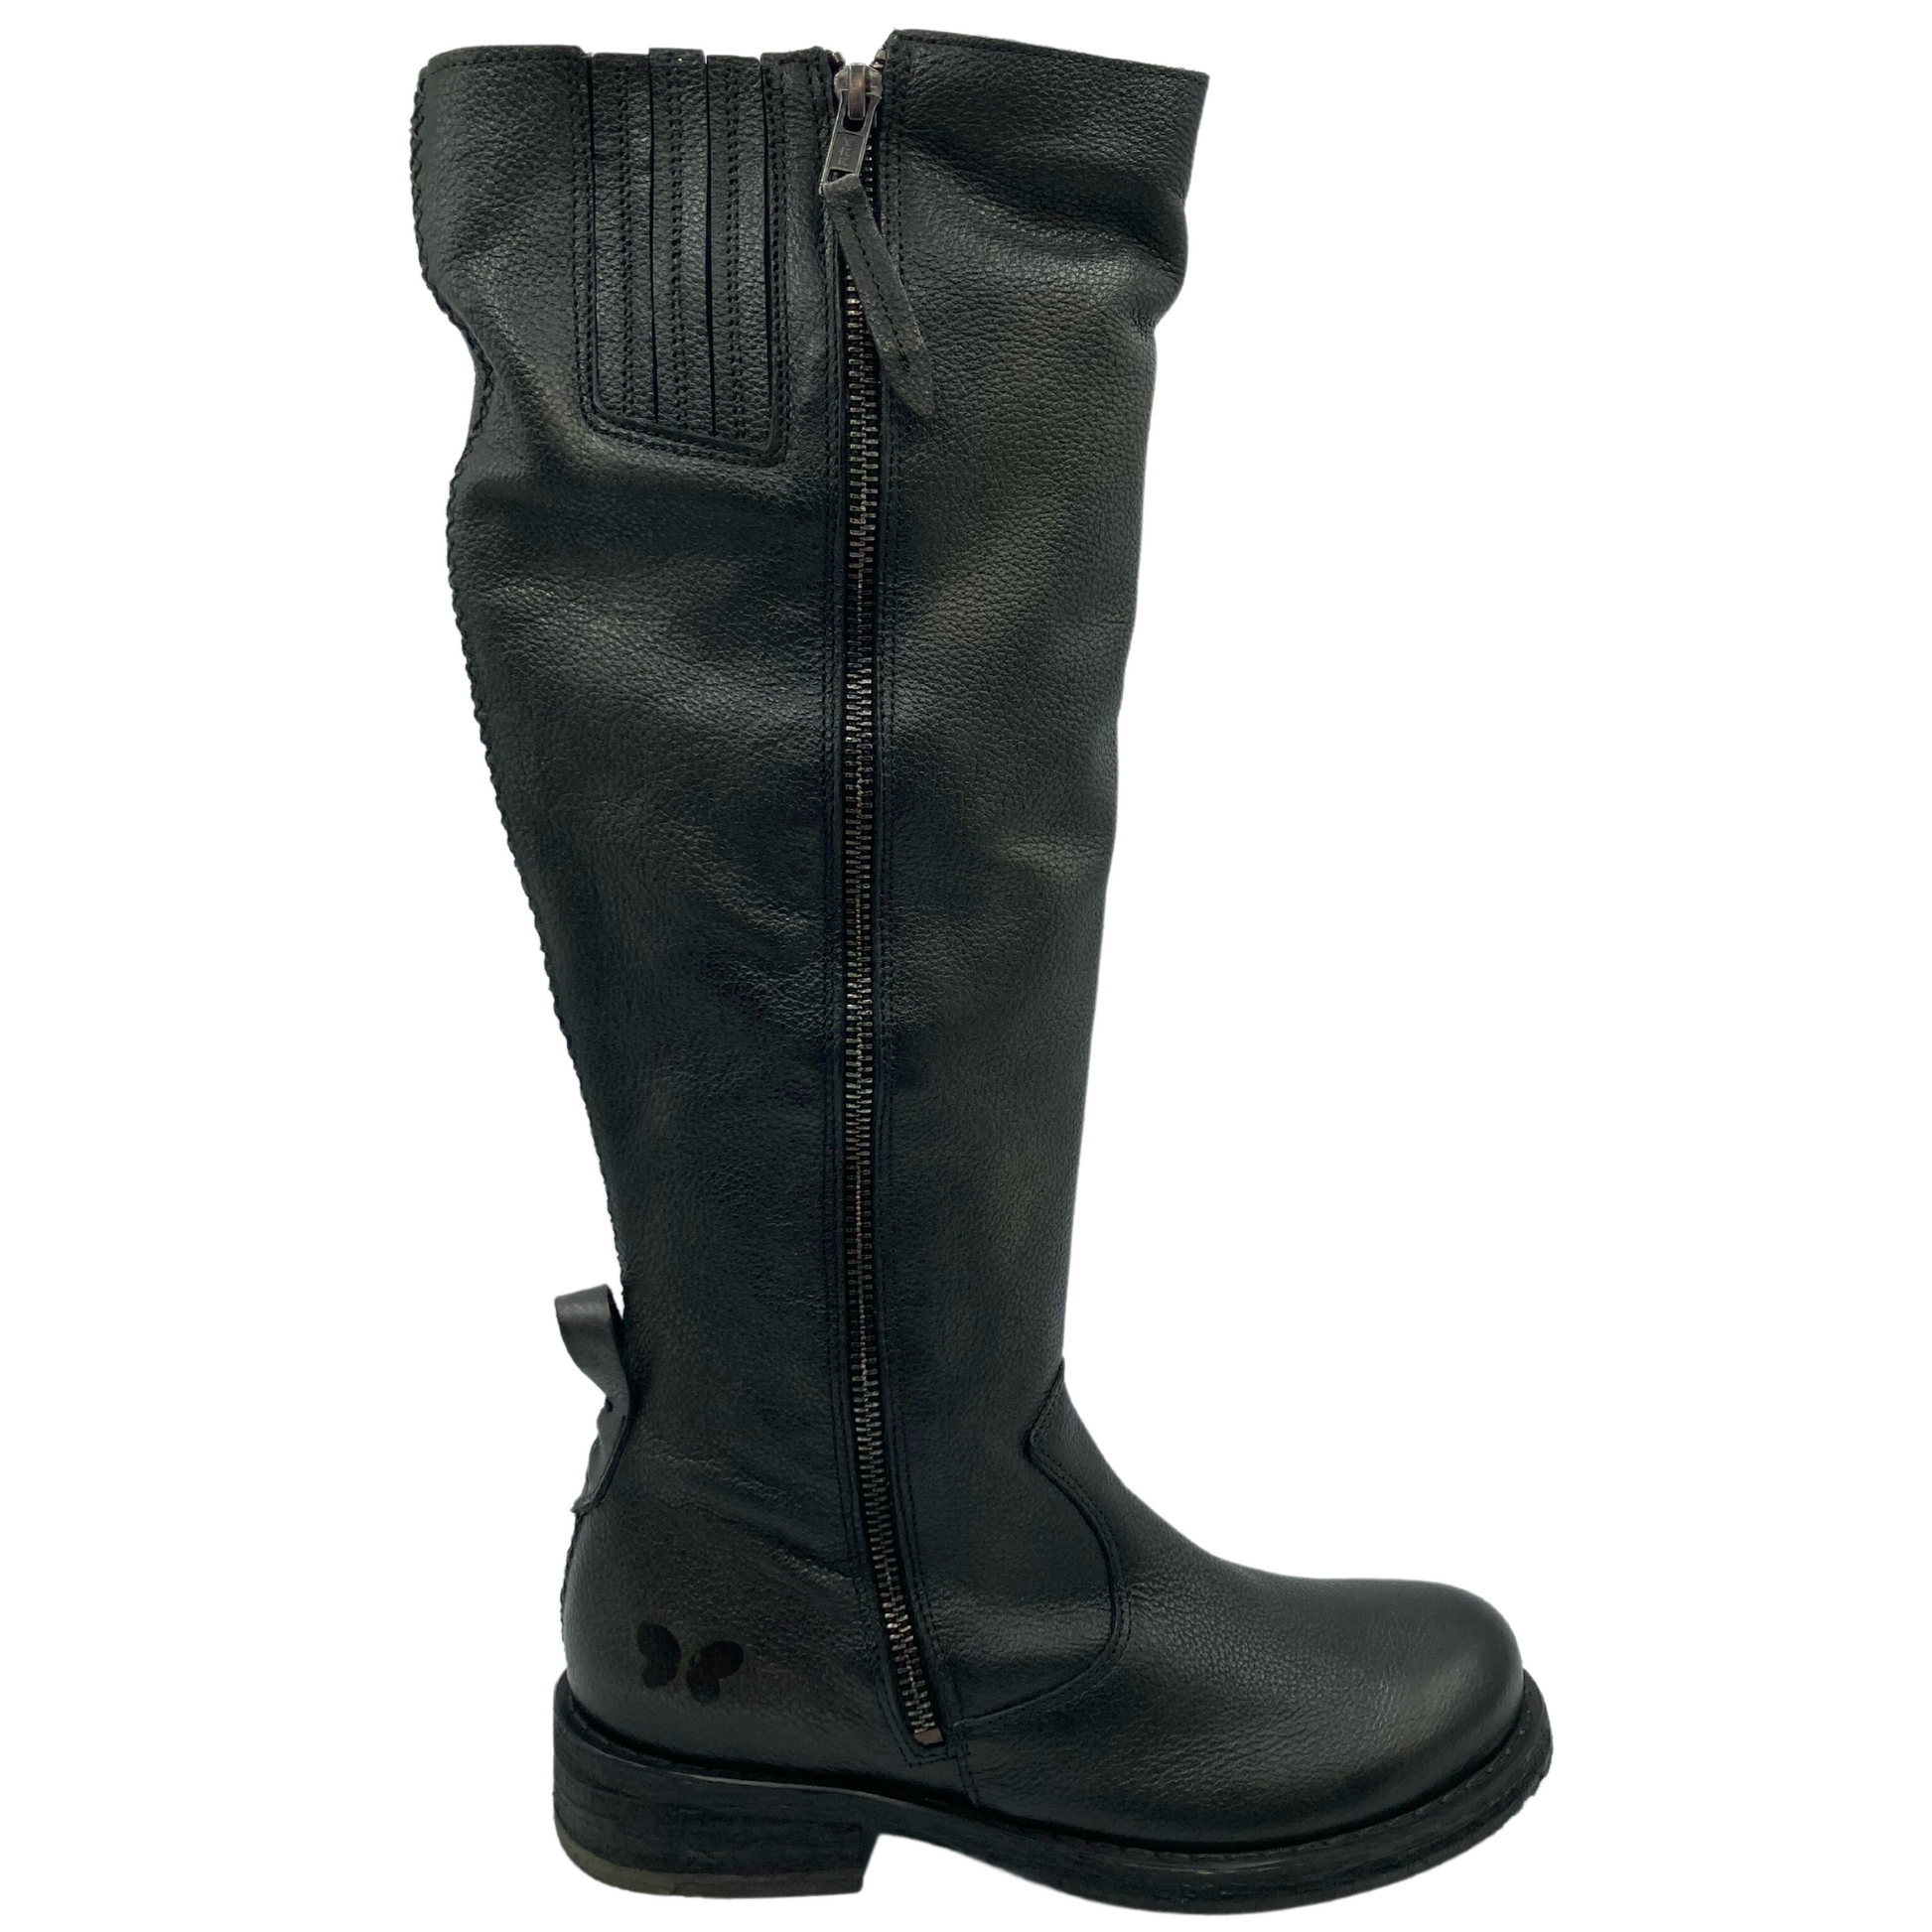 Right facing view of tall, leather boot with 1.25 inch heel and zipper closure